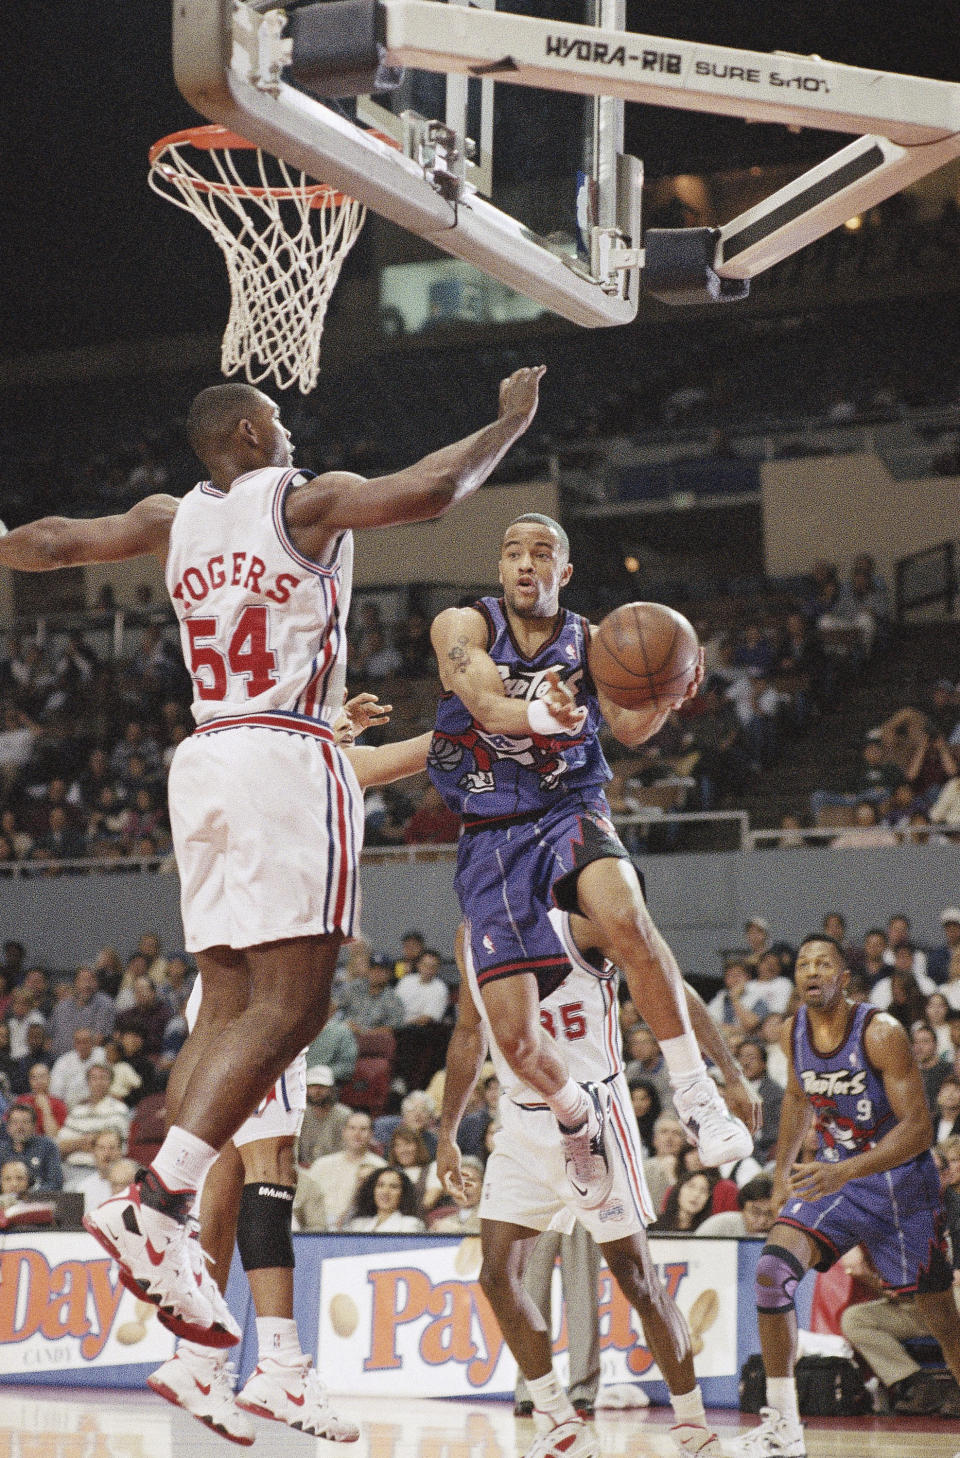 FILE - Toronto Raptors' Damon Stoudamire takes to the air against Los Angeles Clippers' Rodney Rogers in first period NBA action on Feb. 3, 1996, at the Sports Arena in Los Angeles. The longtime NBA guard Stoudamire was hired Monday, March 13, 2023, as Georgia Tech's men's basketball coach. (AP Photo/Michael Tweed, File)